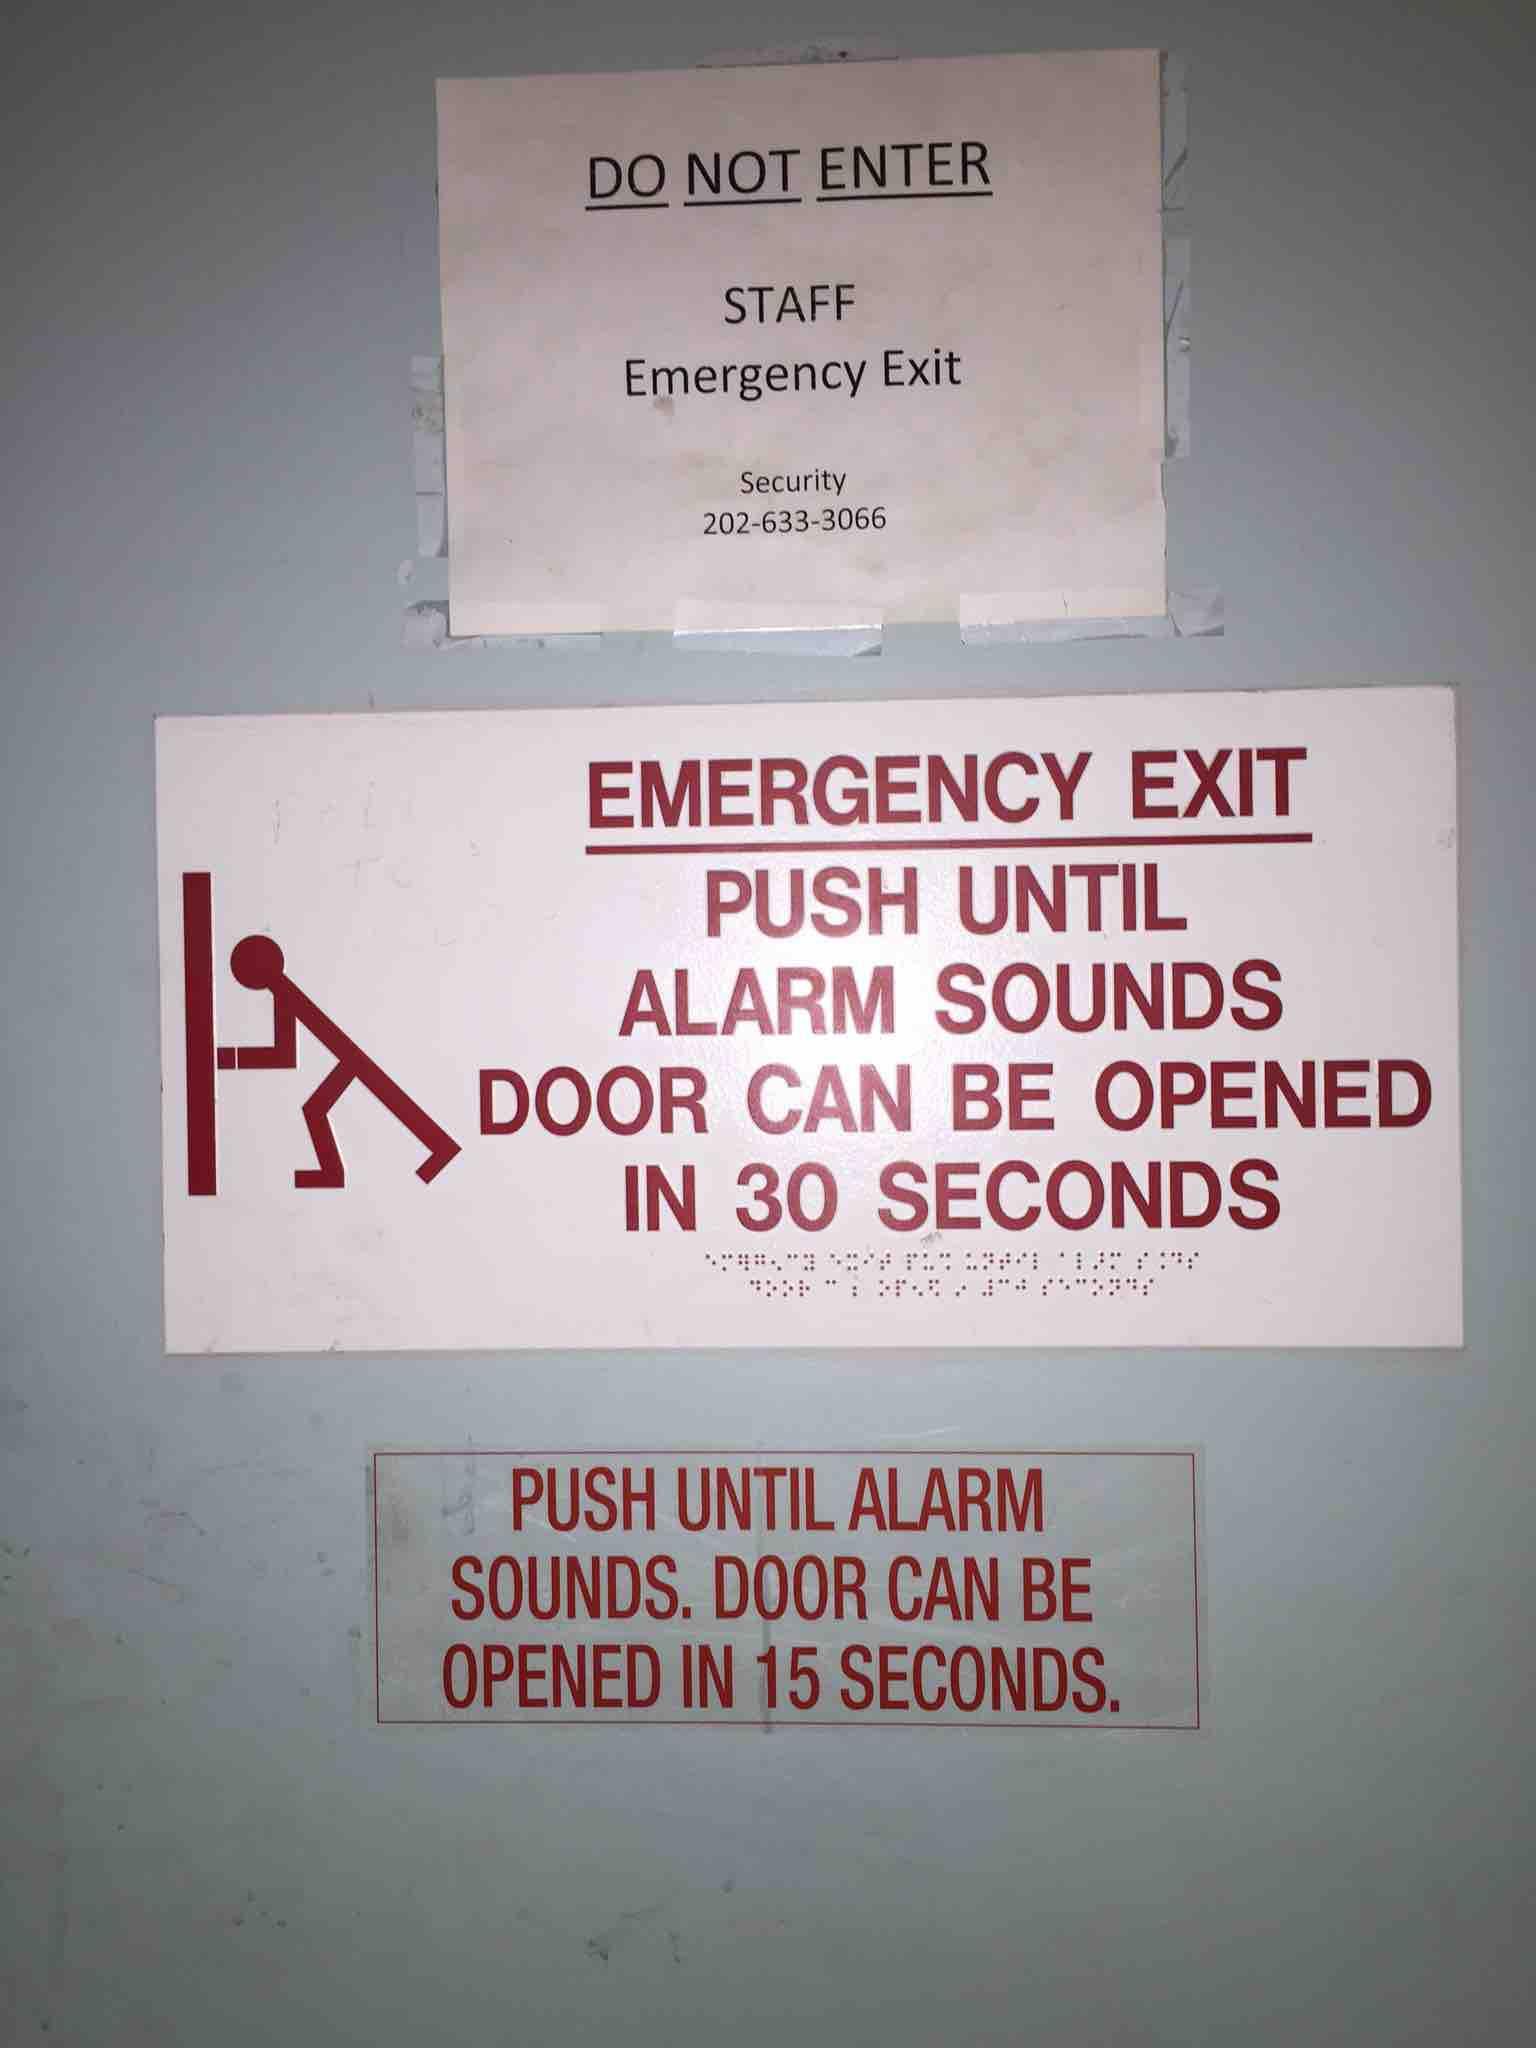 you had one job enter do not - Do Not Enter Staff Emergency Exit Security 2026333066 Emergency Exit Push Until Alarm Sounds Door Can Be Opened In 30 Seconds Push Until Alarm Sounds. Door Can Be Opened In 15 Seconds.